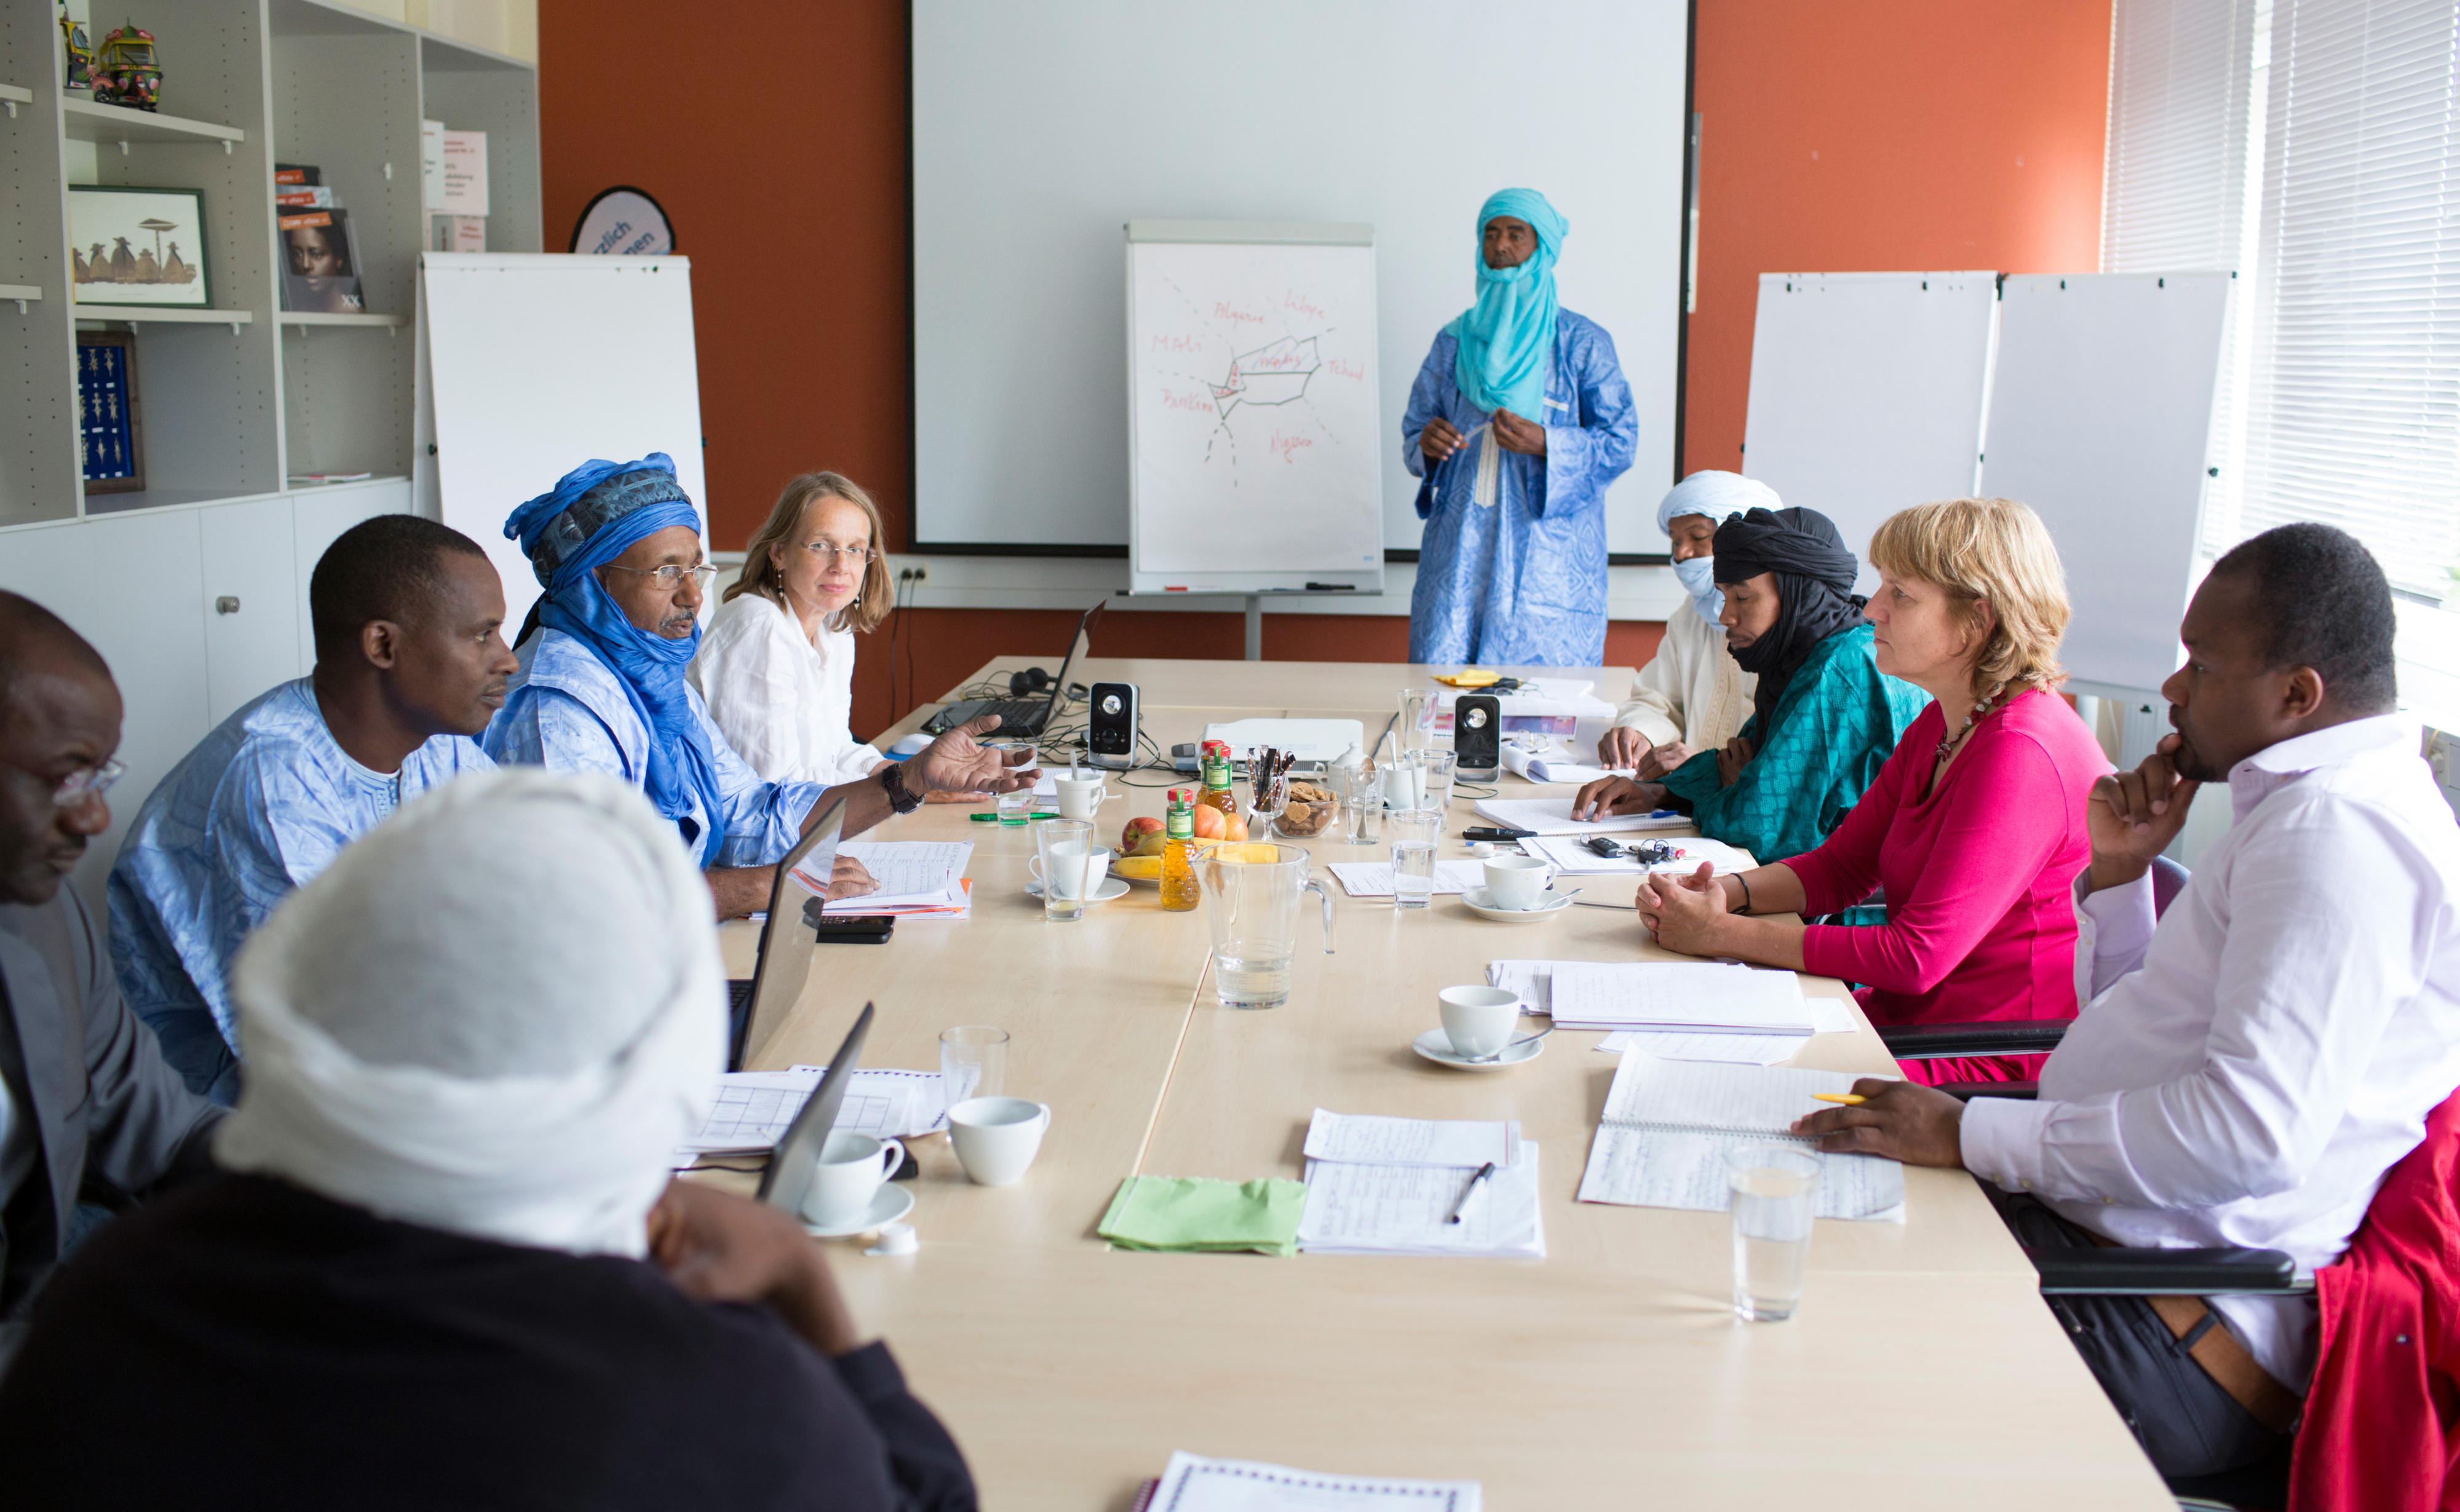 Employees of the aid organization CARE International from Mali and Niger are working on a project proposal to combat the causes of flight in the region of Mali North and Niger North.